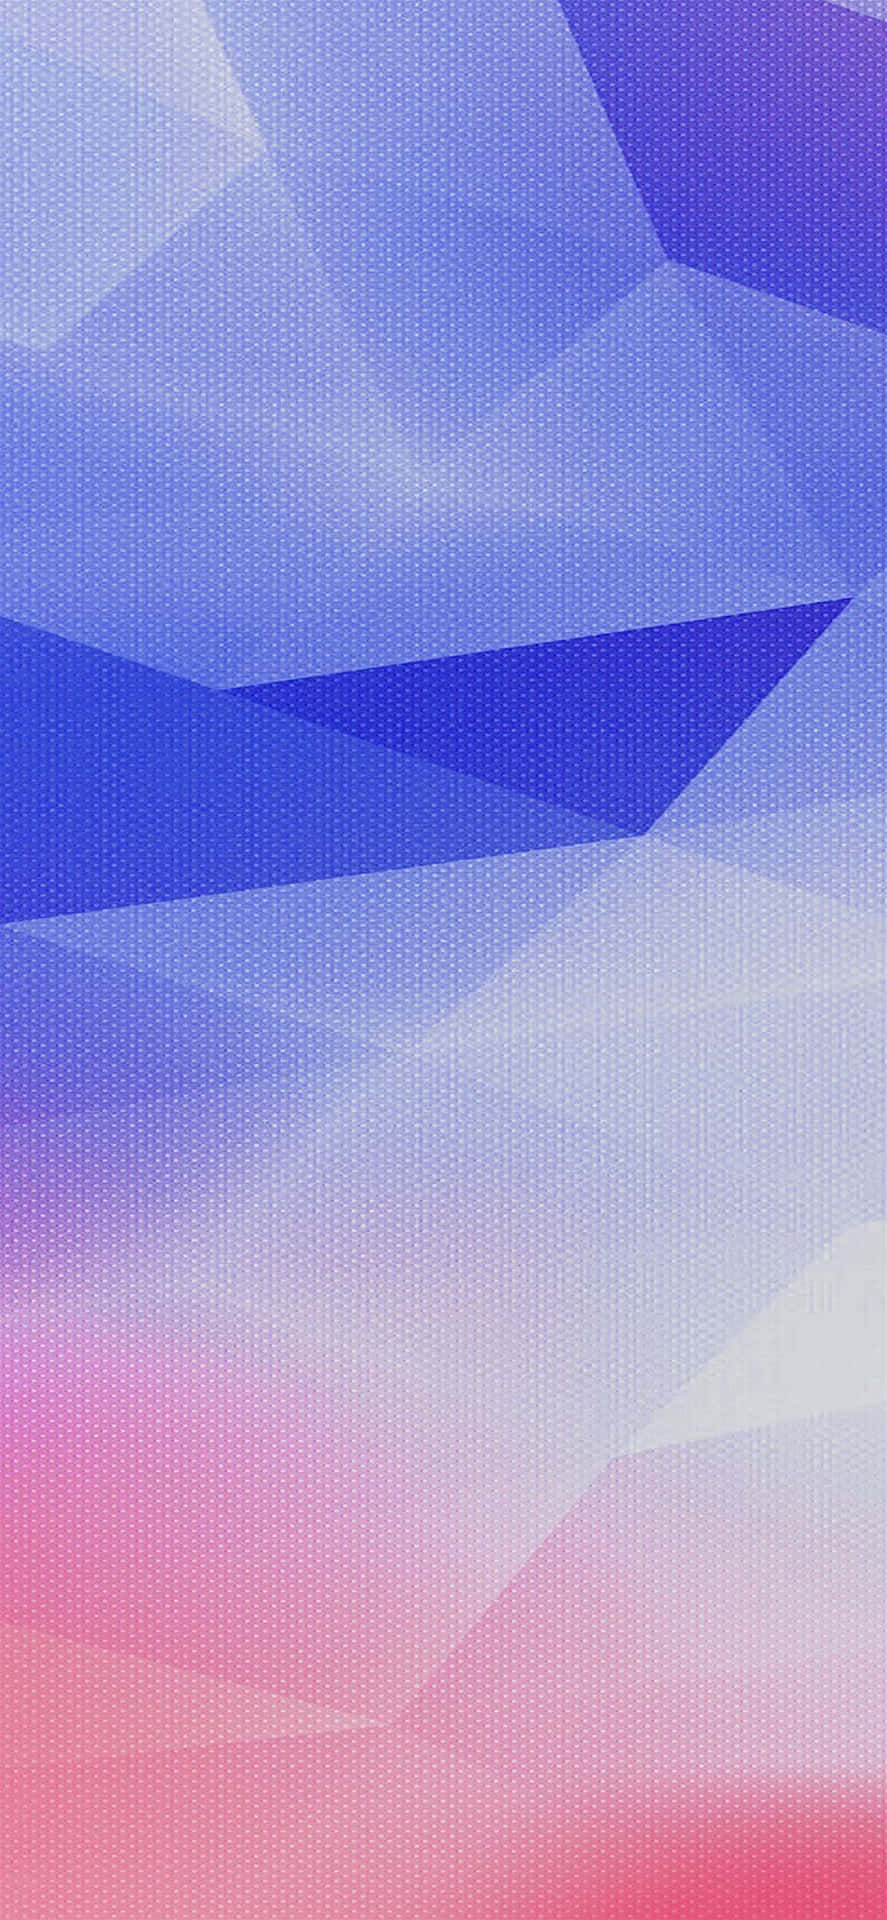 Abstract Blue Pink Gradient Background Wallpaper